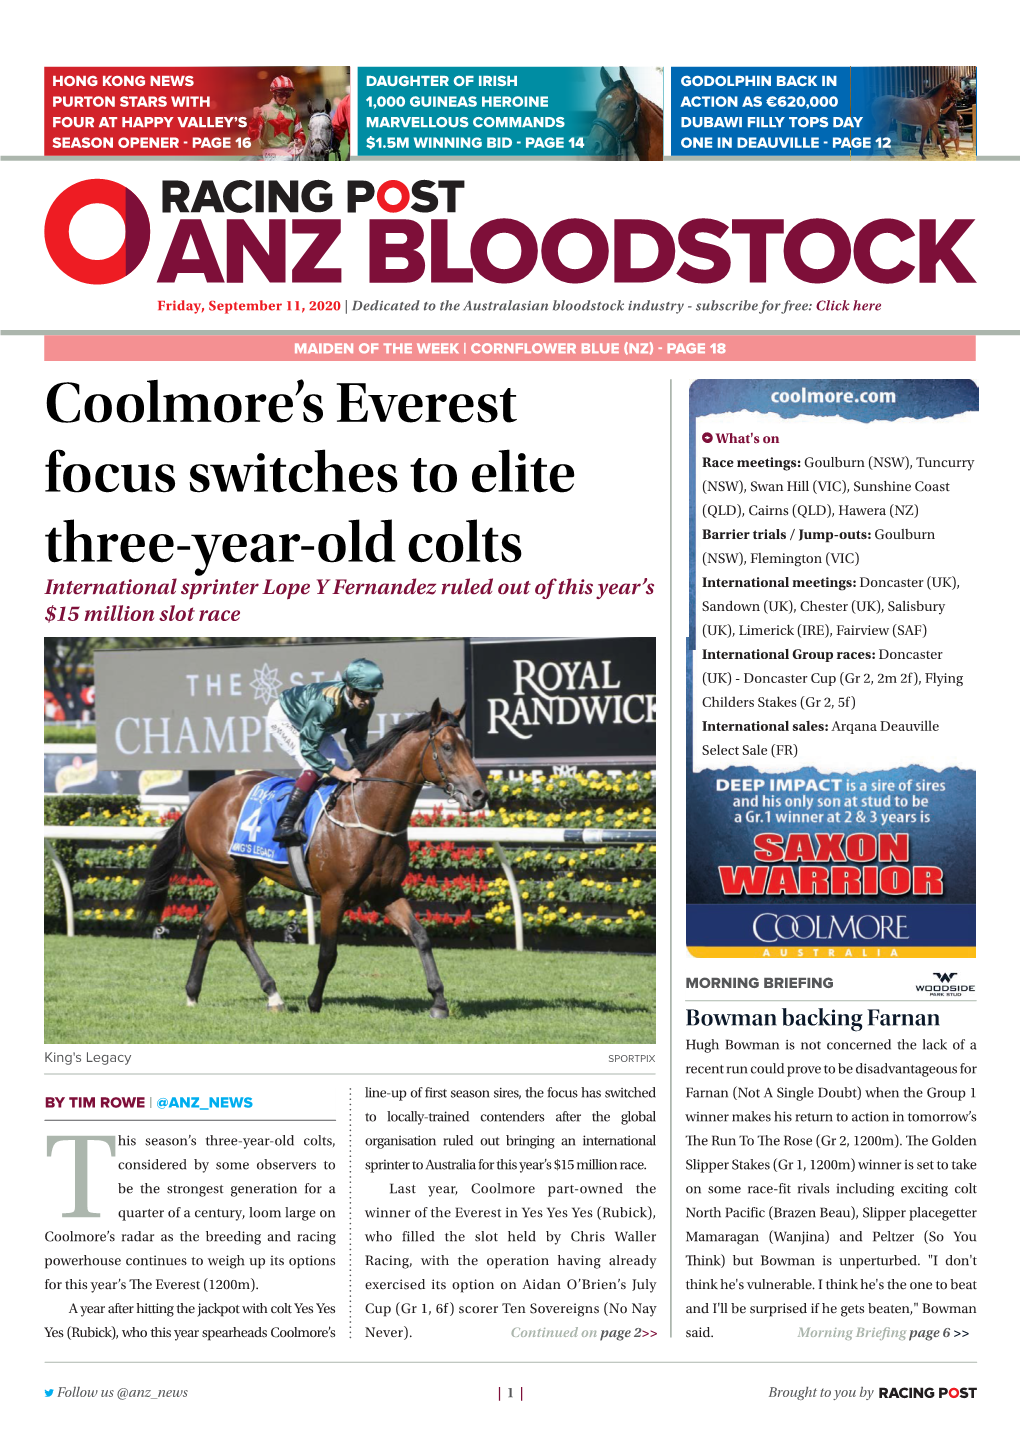 Coolmore's Everest Focus Switches to Elite Three-Year-Old Colts